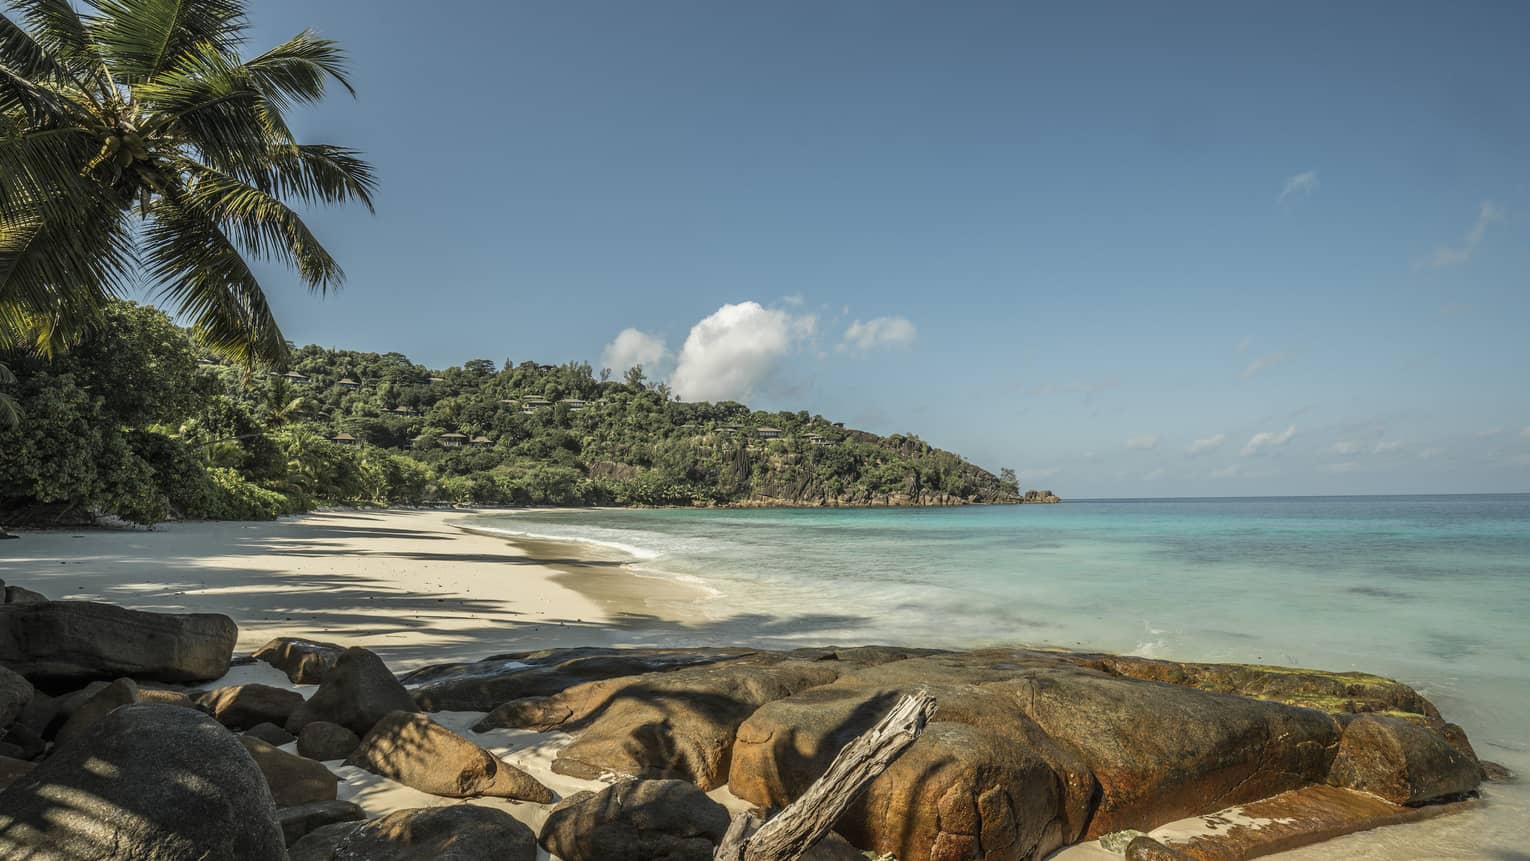 A rocky beach adorned with palm trees and a tropical forest